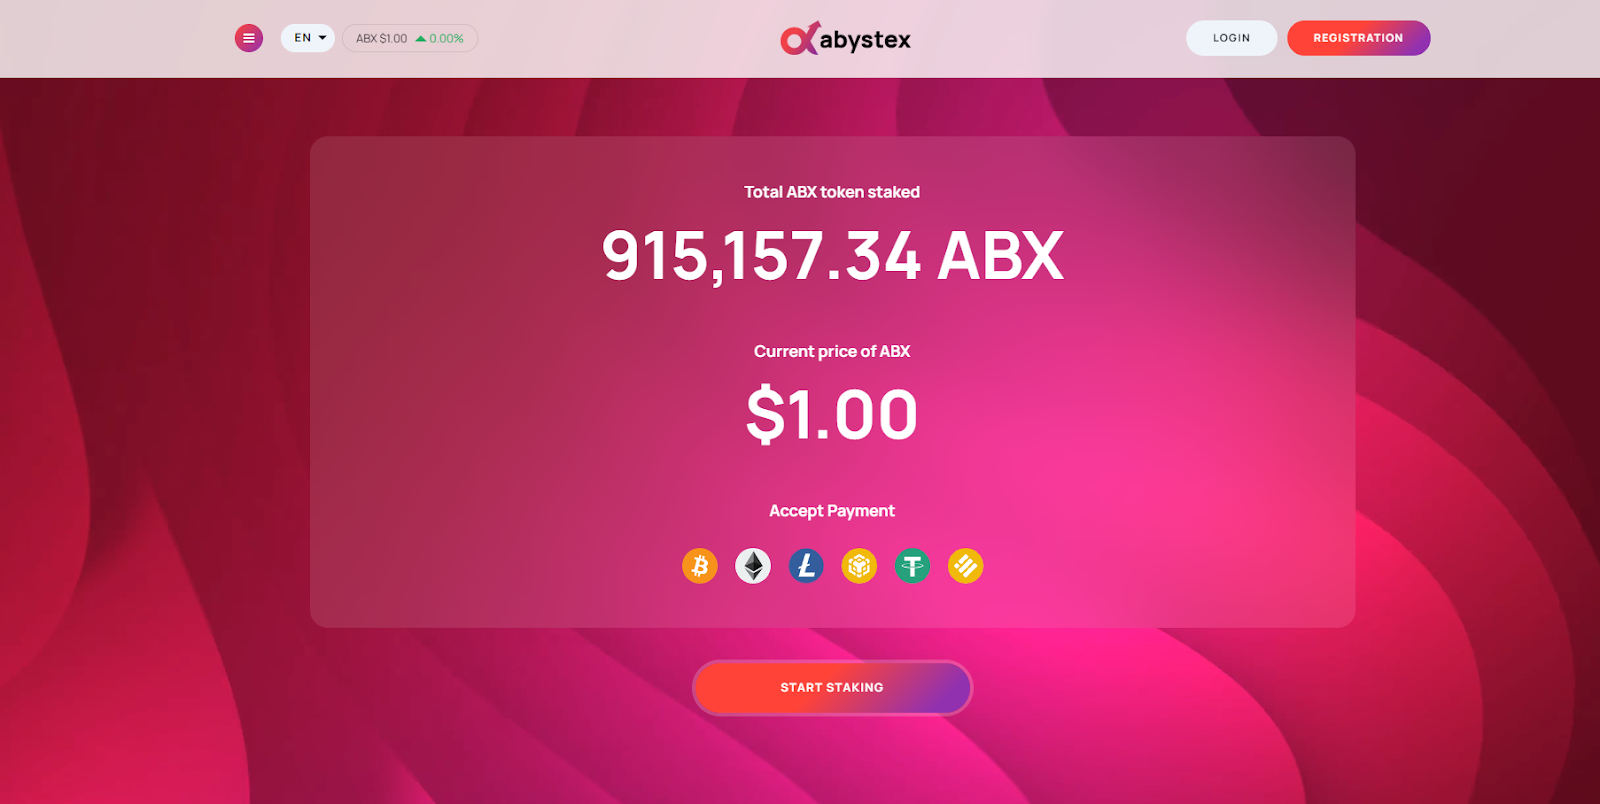 abystex.com review, abystex.com new hyip review,abystex.com scam or paying,abystex.com scam or legit,abystex.com full review details and status,abystex.com payout proof,abystex.com new hyip,abystex.com oxifinance hyip,new hyip,best hyip,legit hyip,top hyip,hourly paying hyip,long term paying hyip,instant paying hyip,best investment project